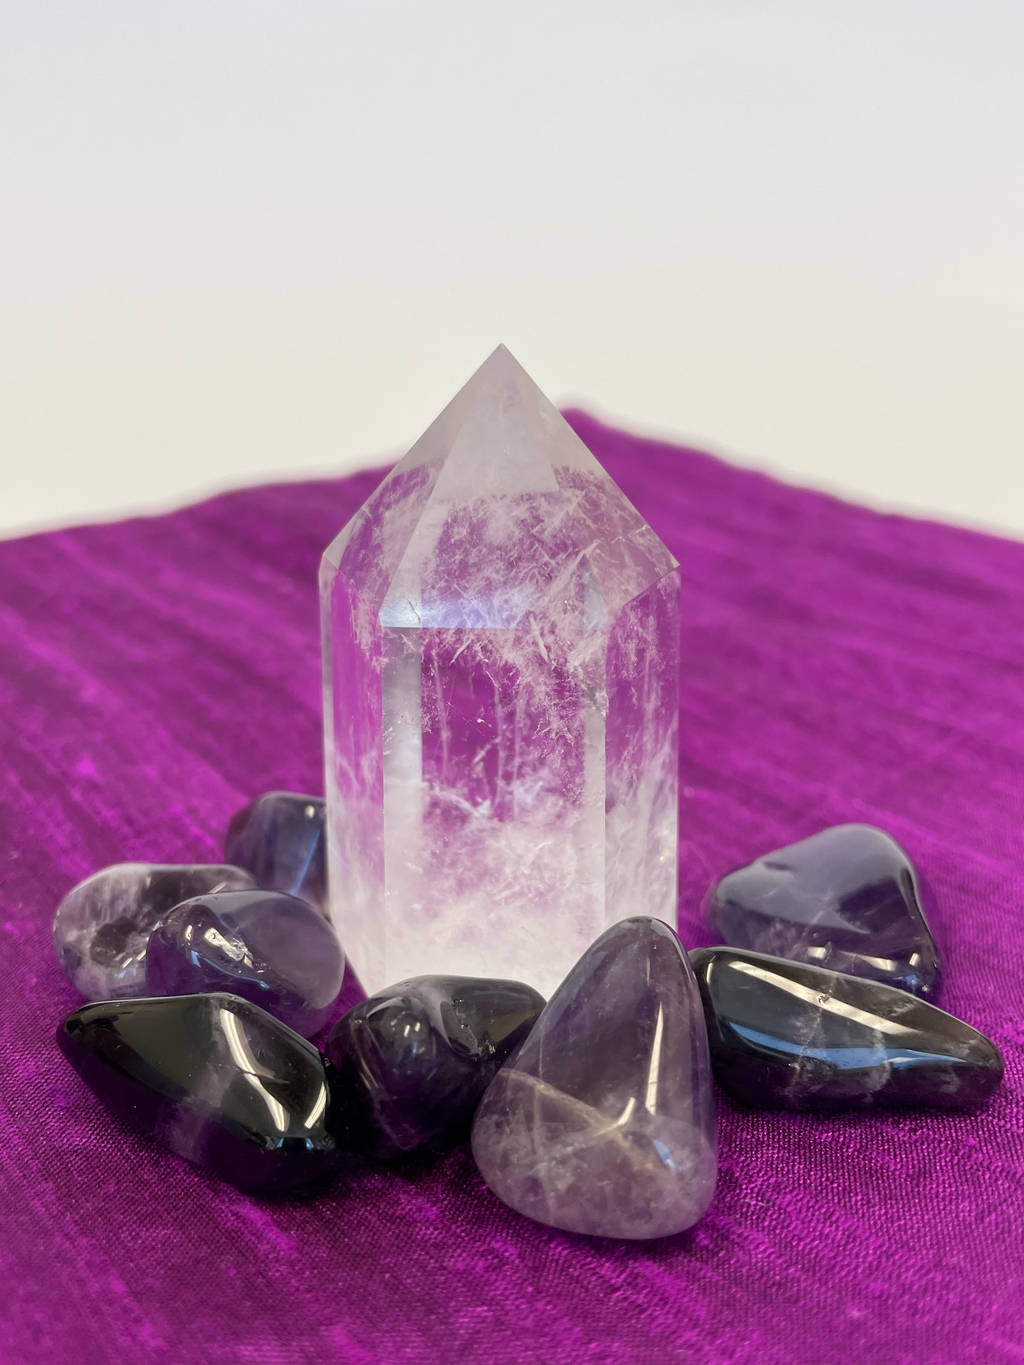 Beautiful clear crystal point holds both beauty and meaning. Quartz is the "most powerful healing and energy amplifier on the planet" (Judy Hall). It is cleansing to organs of the physical body and It also cleanses the soul and it increases your spiritual energy to the highest level (and so much more).  Place this on your altar, book shelf, nightstand or table. Use for meditation, healing, cleansing and more. Point is approximately 2.2" tall. Cost is $12.98.